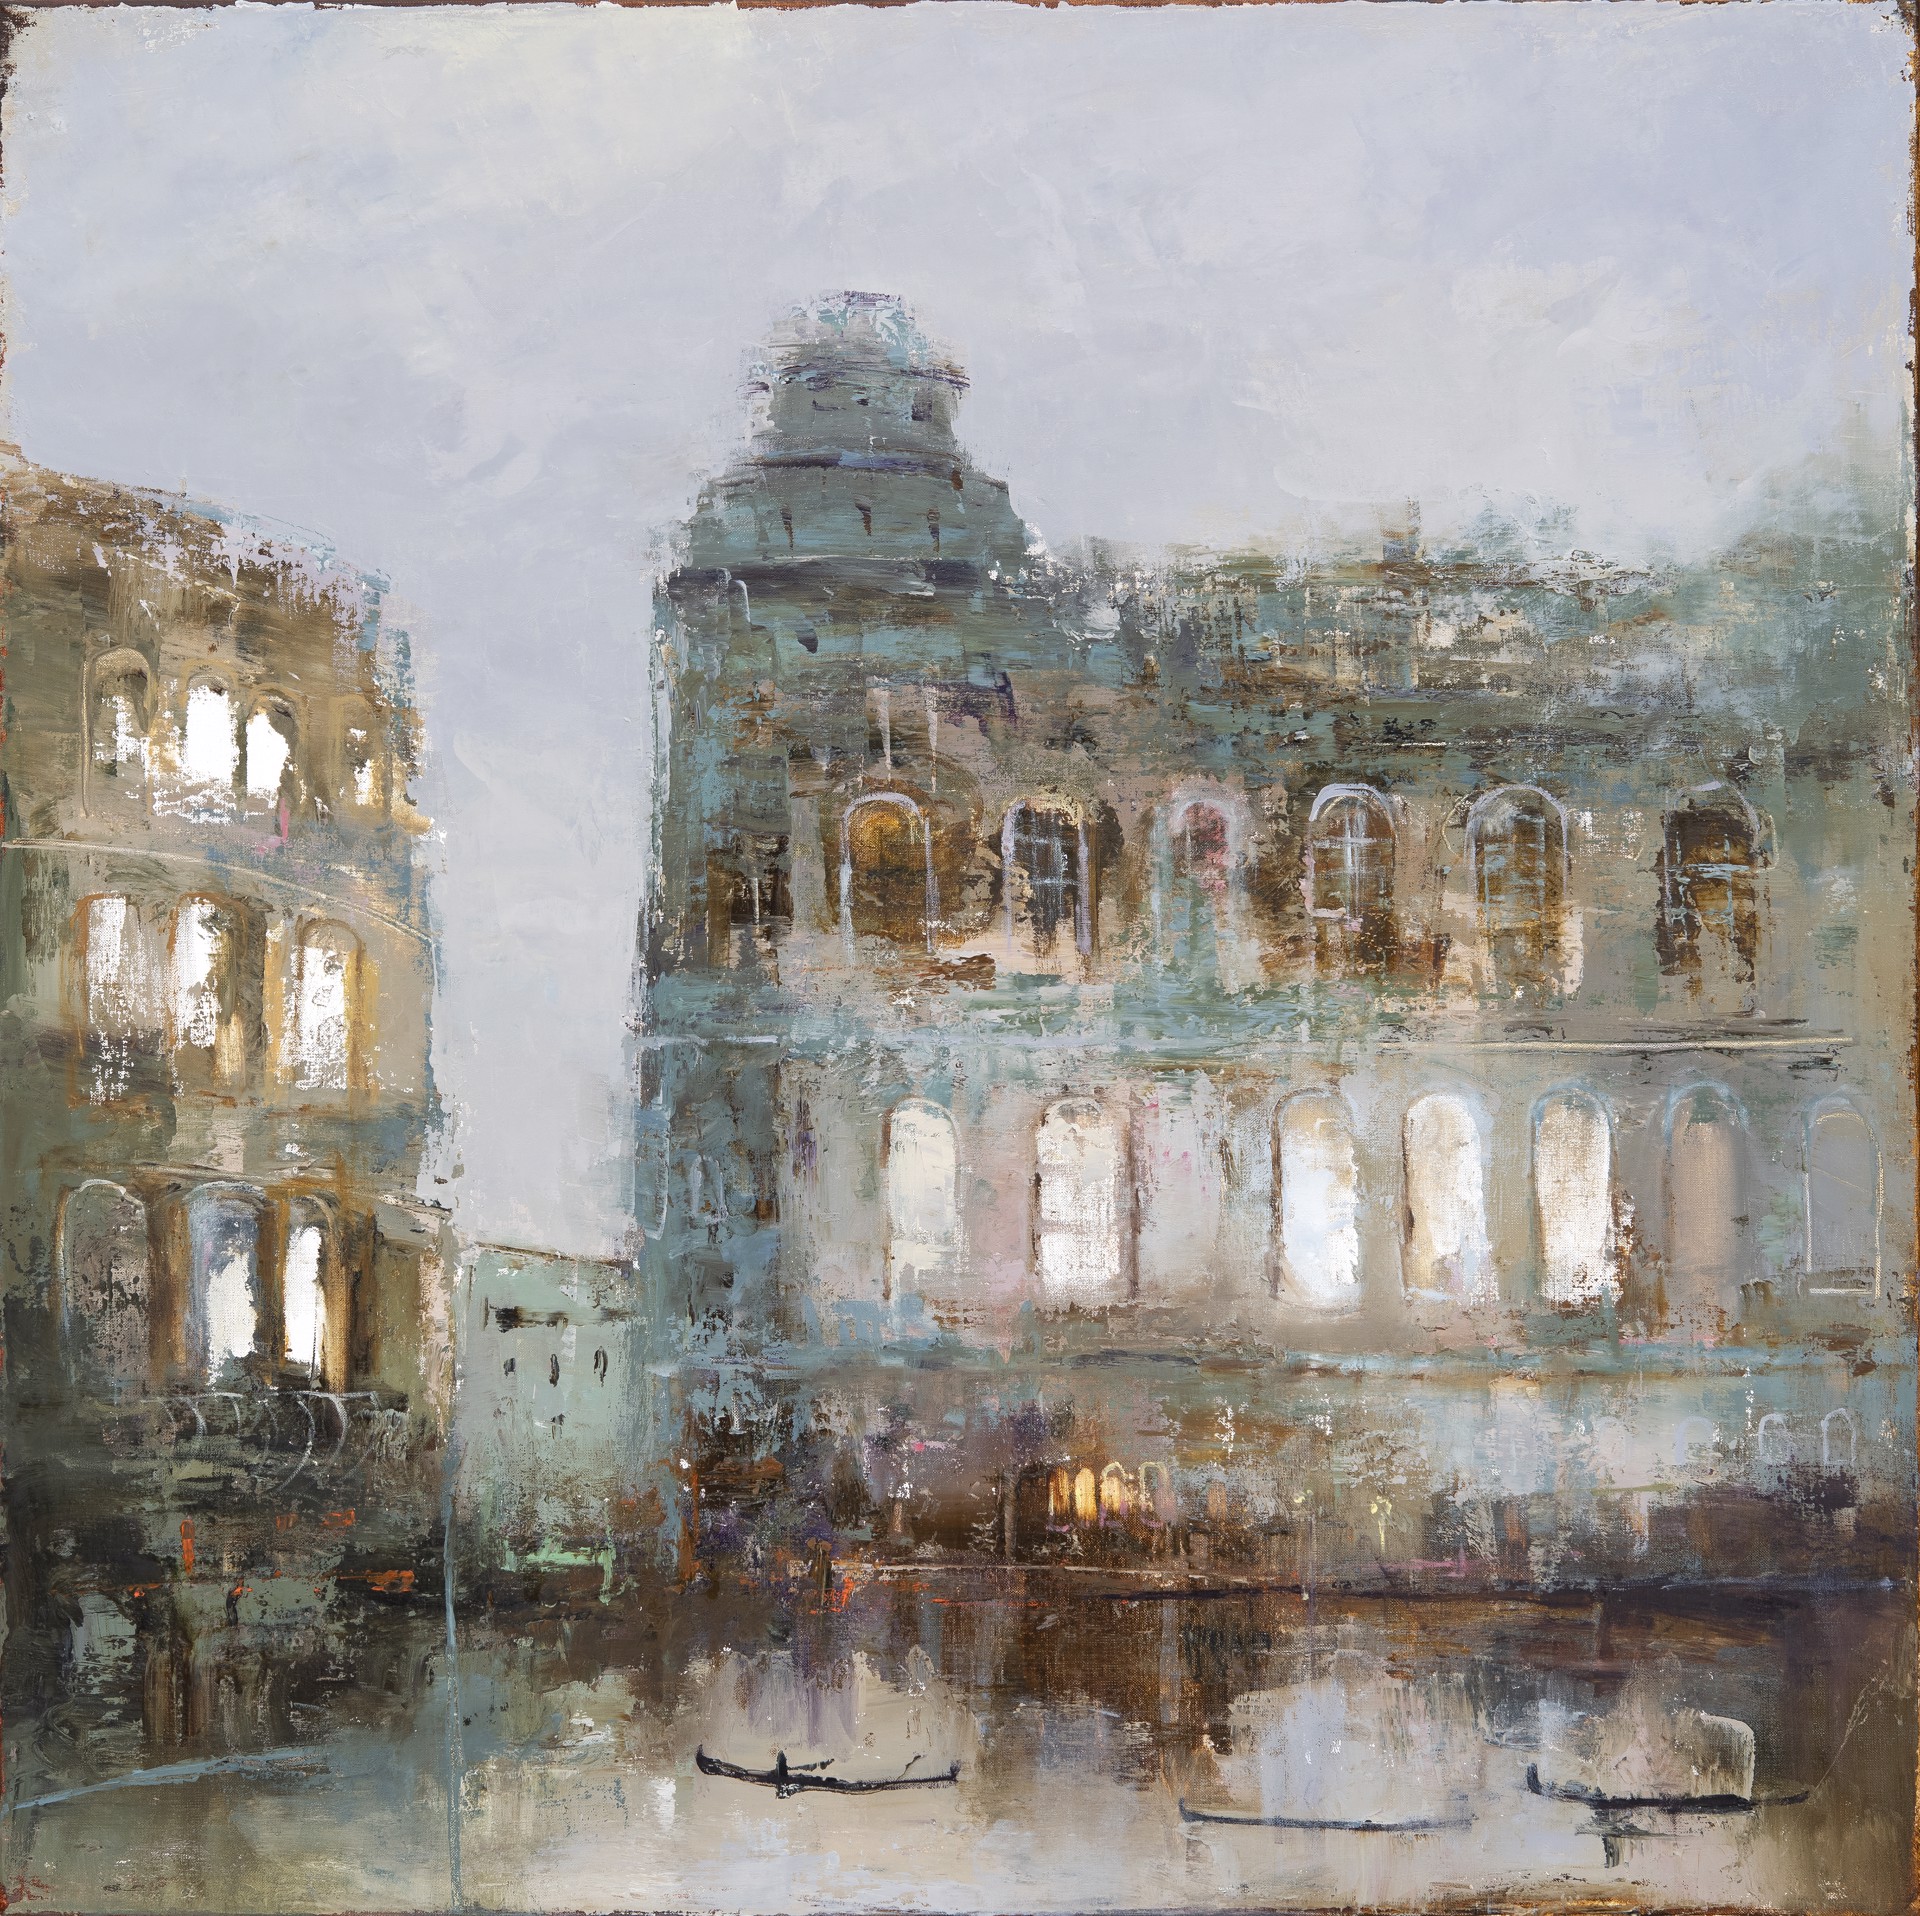 Every street lamp that I pass beats like a drum by France Jodoin